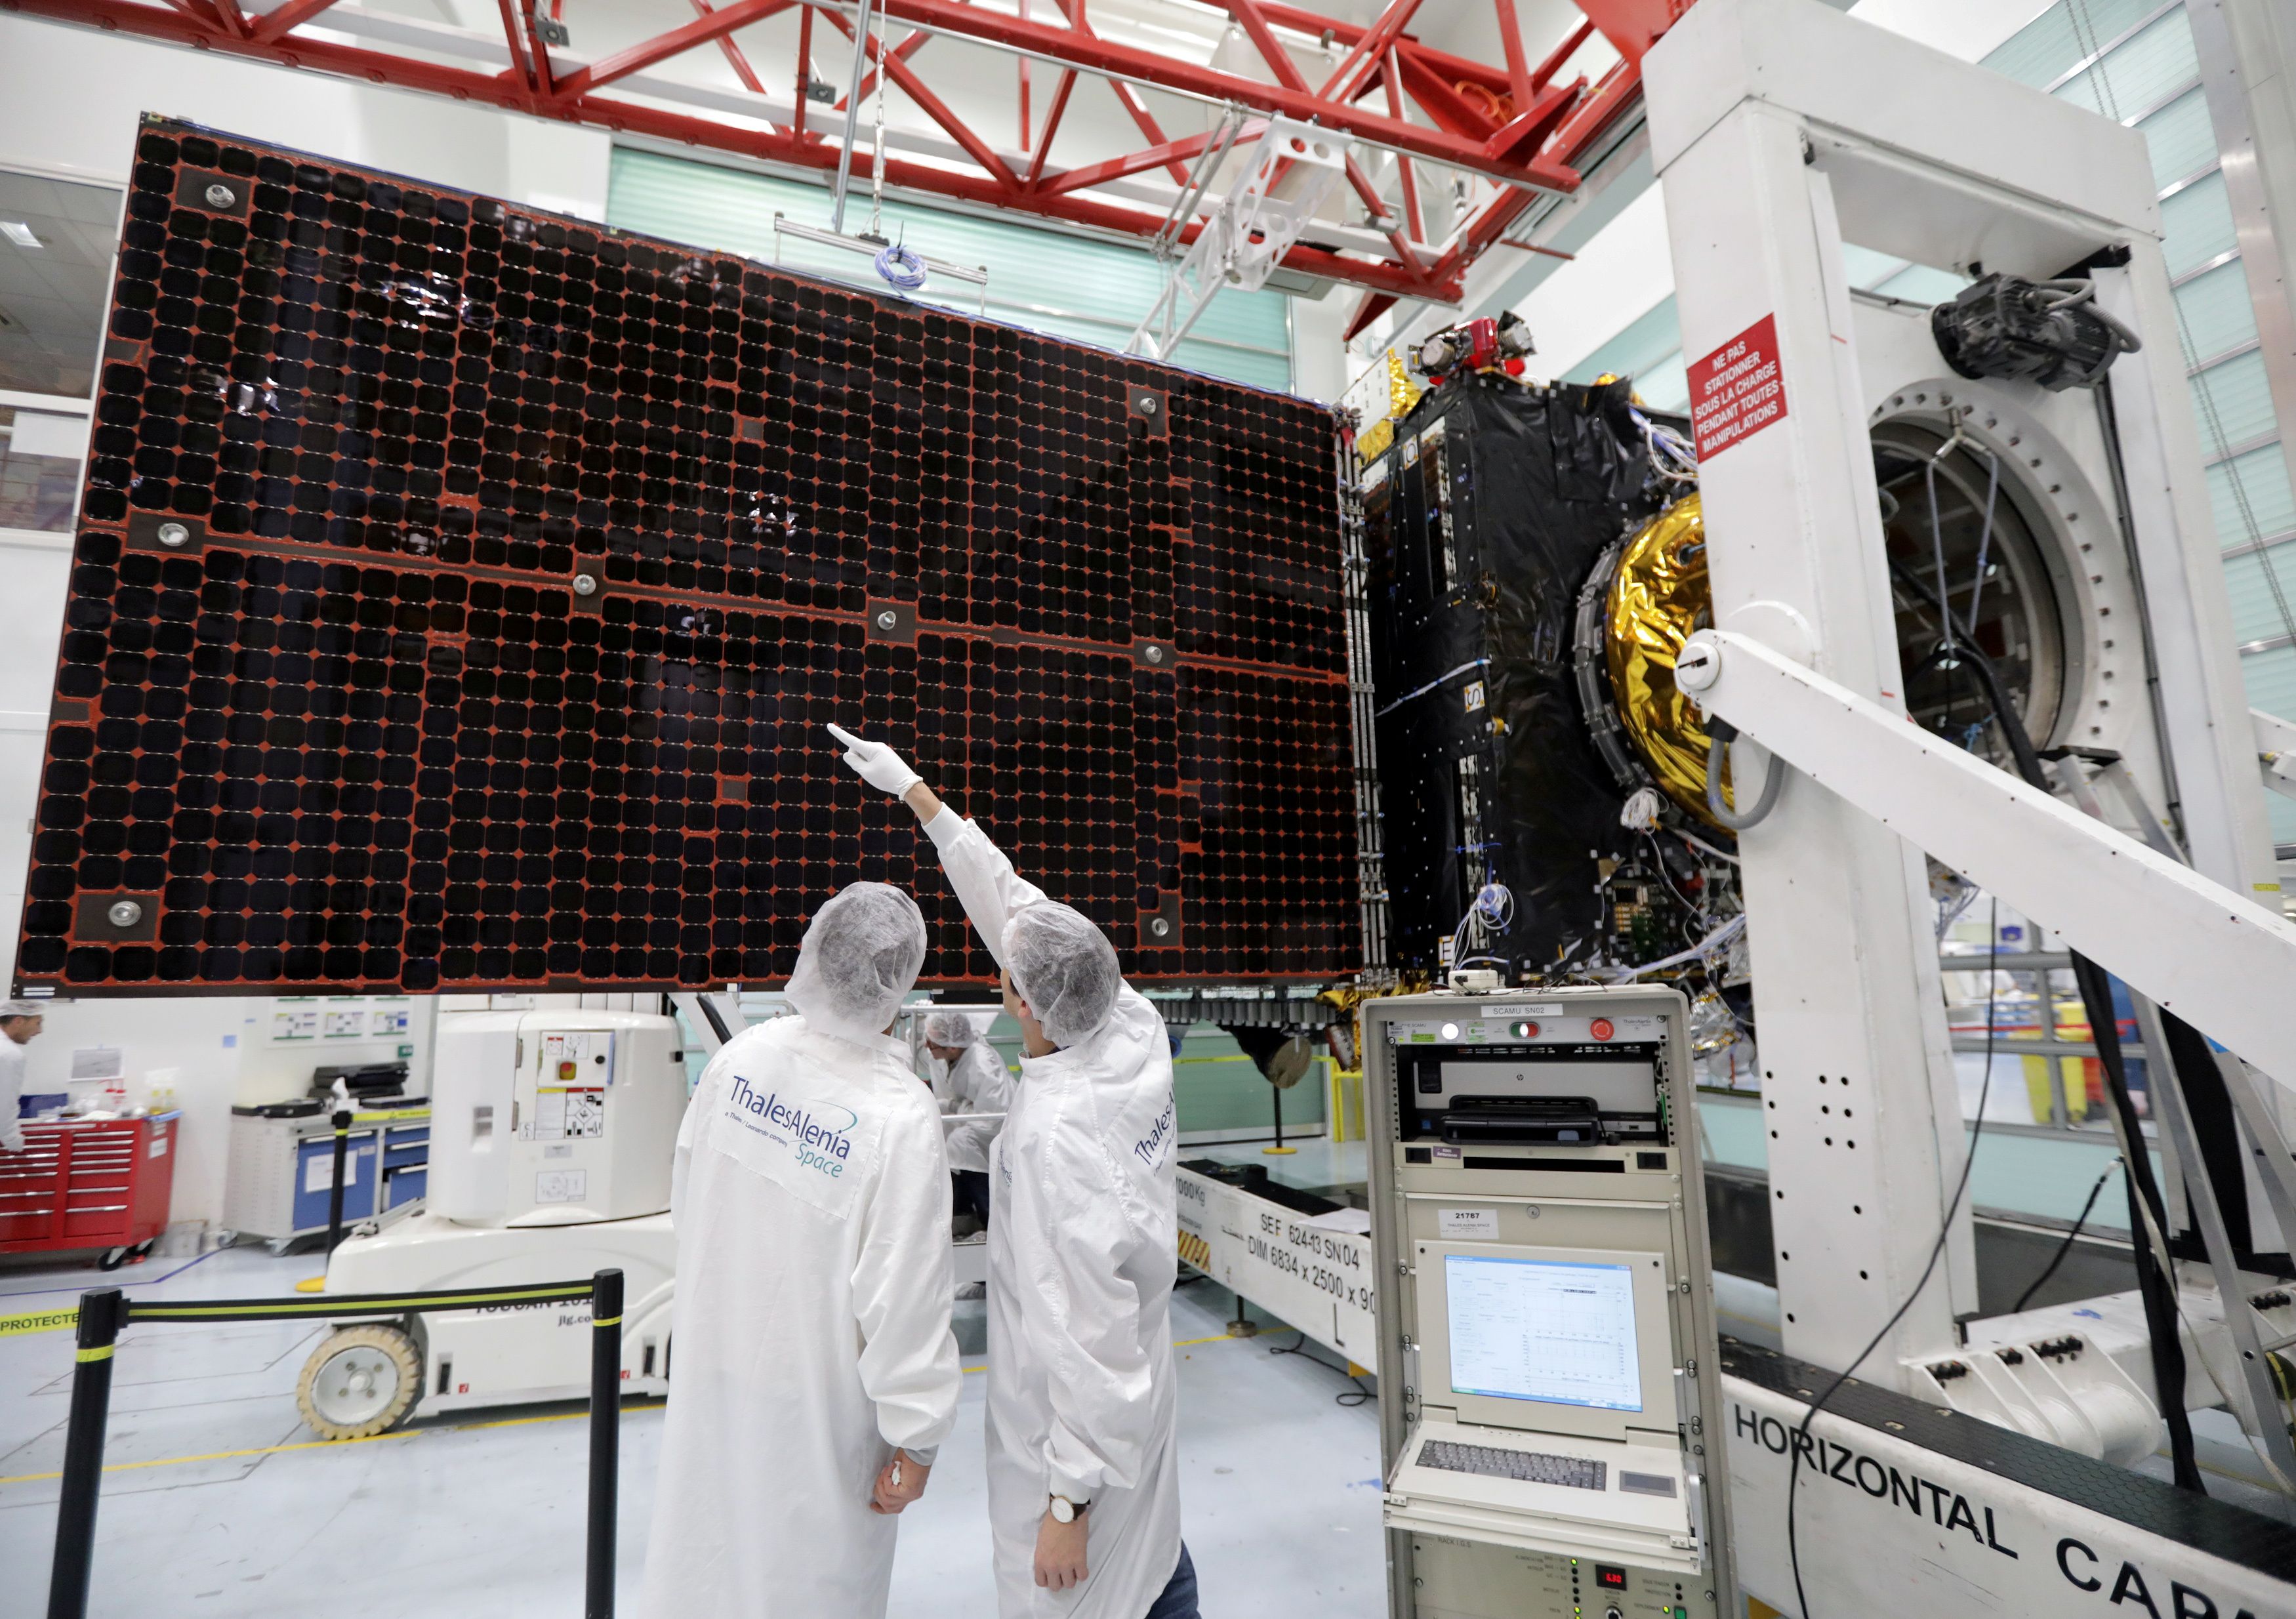 A technician looks at a solar panel on the Inmarsat S-Band/Hellas-Sat 3 satellite in the clean room facilities of the Thales Alenia Space plant in Cannes, France, February 3, 2017.   REUTERS/Eric Gaillard